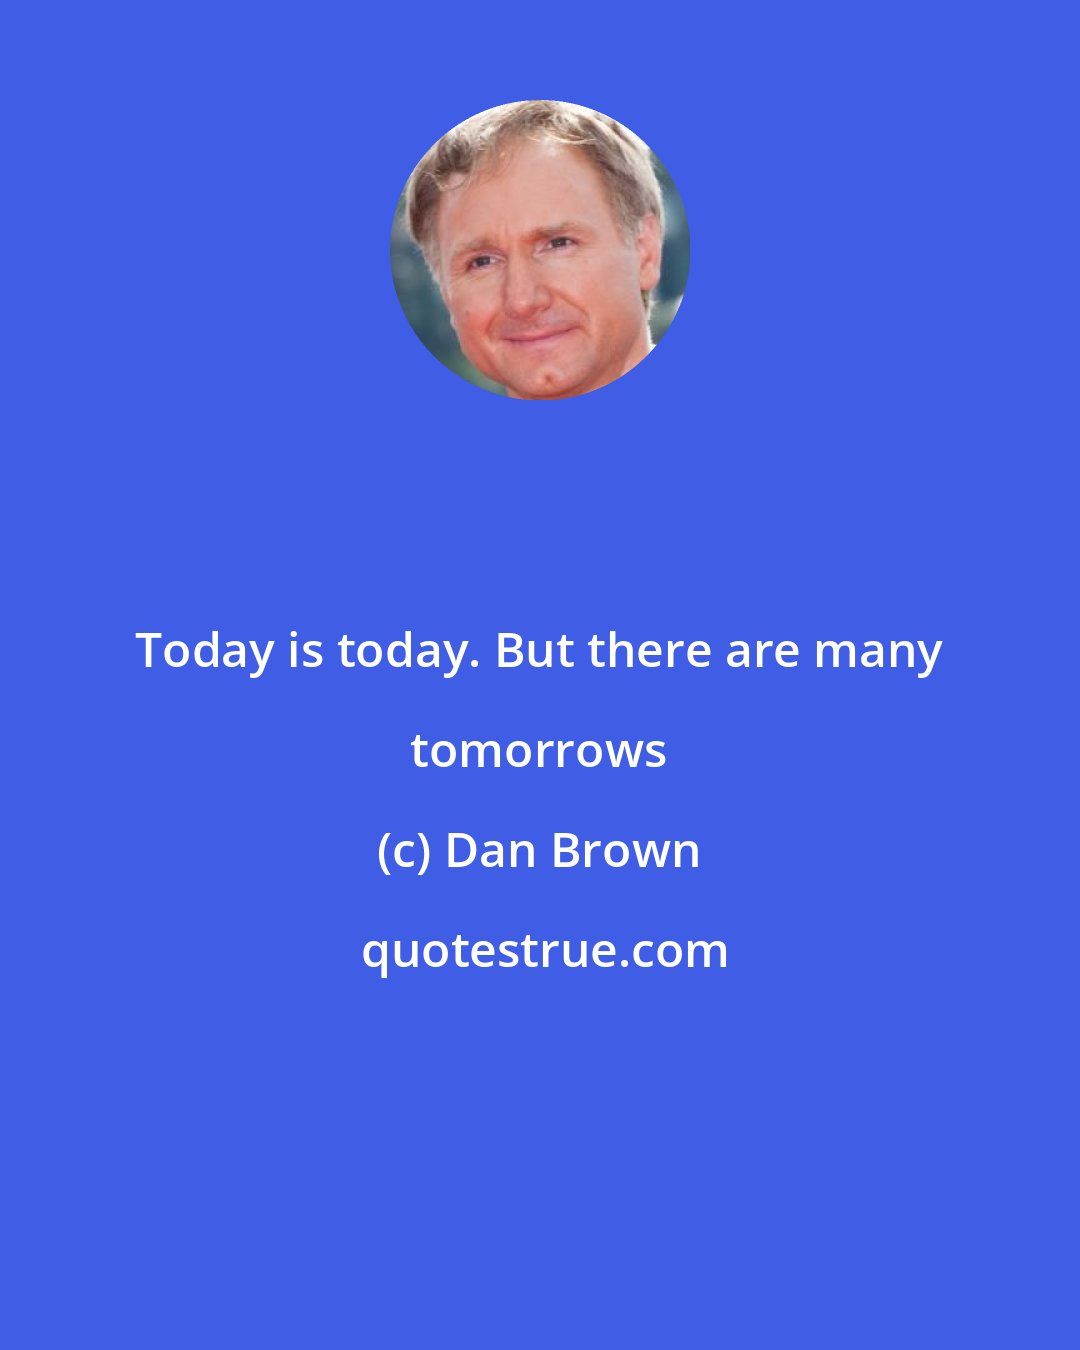 Dan Brown: Today is today. But there are many tomorrows